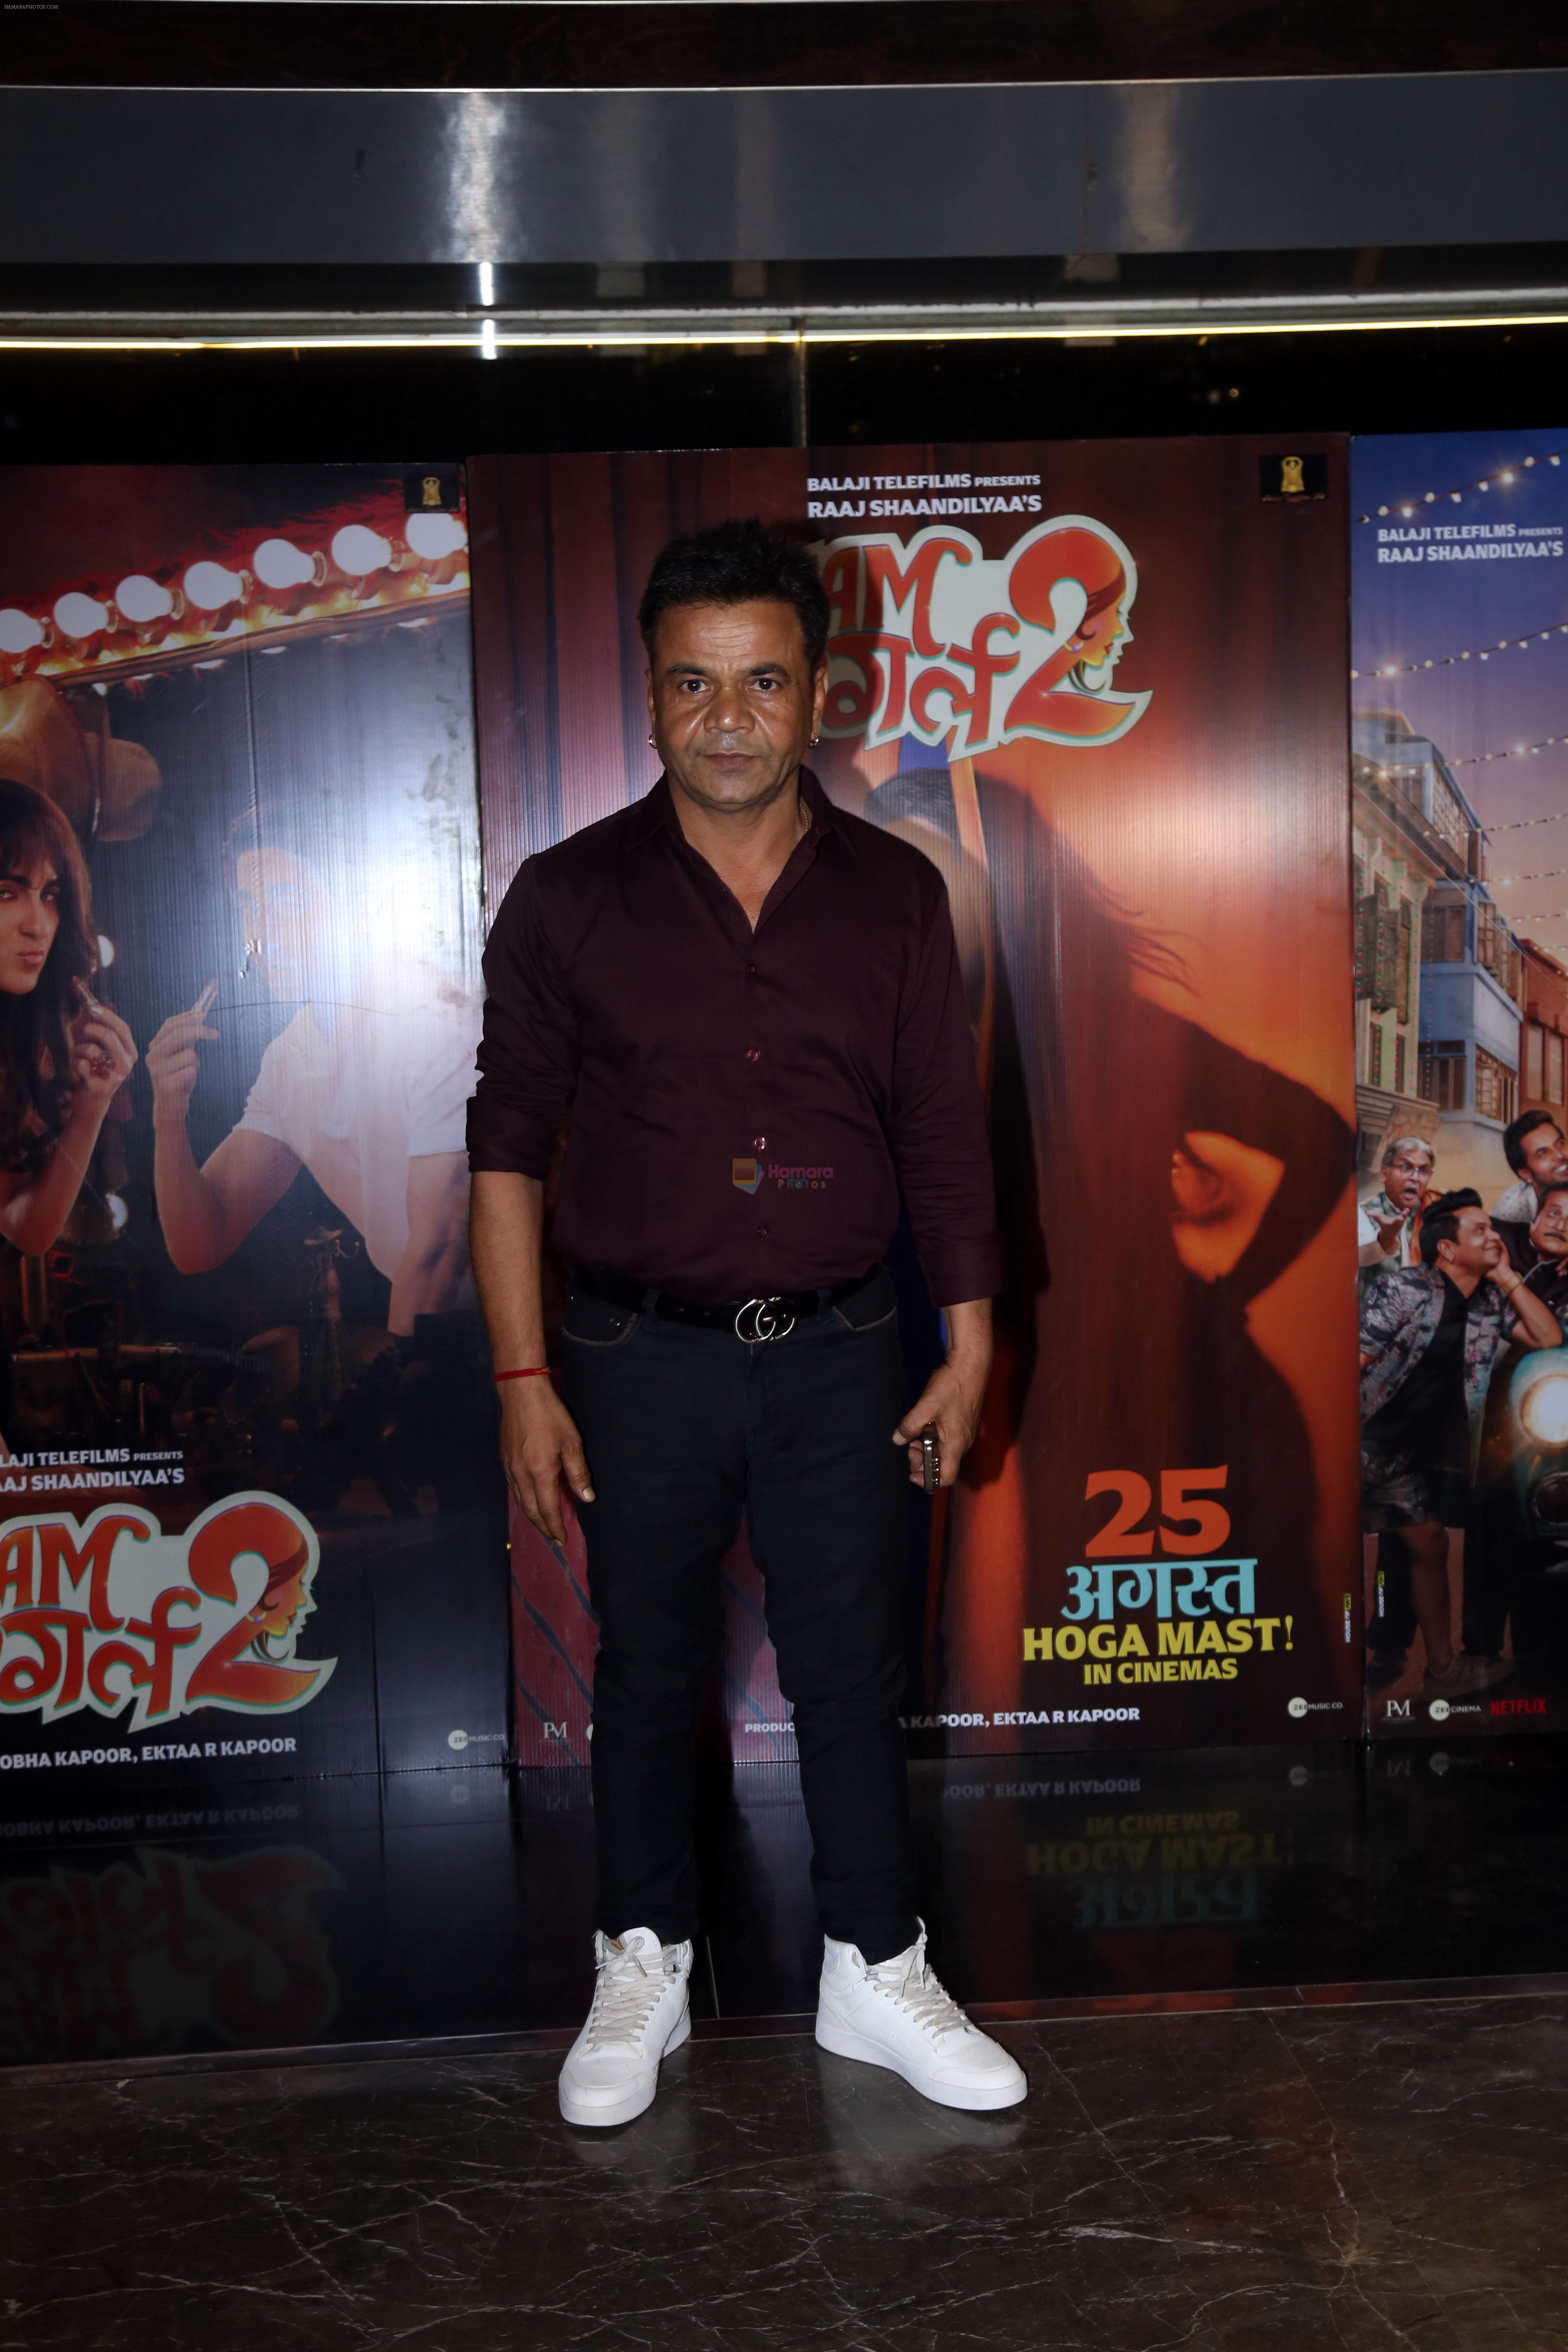 Rajpal Yadav at the premiere of film Dream Girl 2 on 24th August 2023